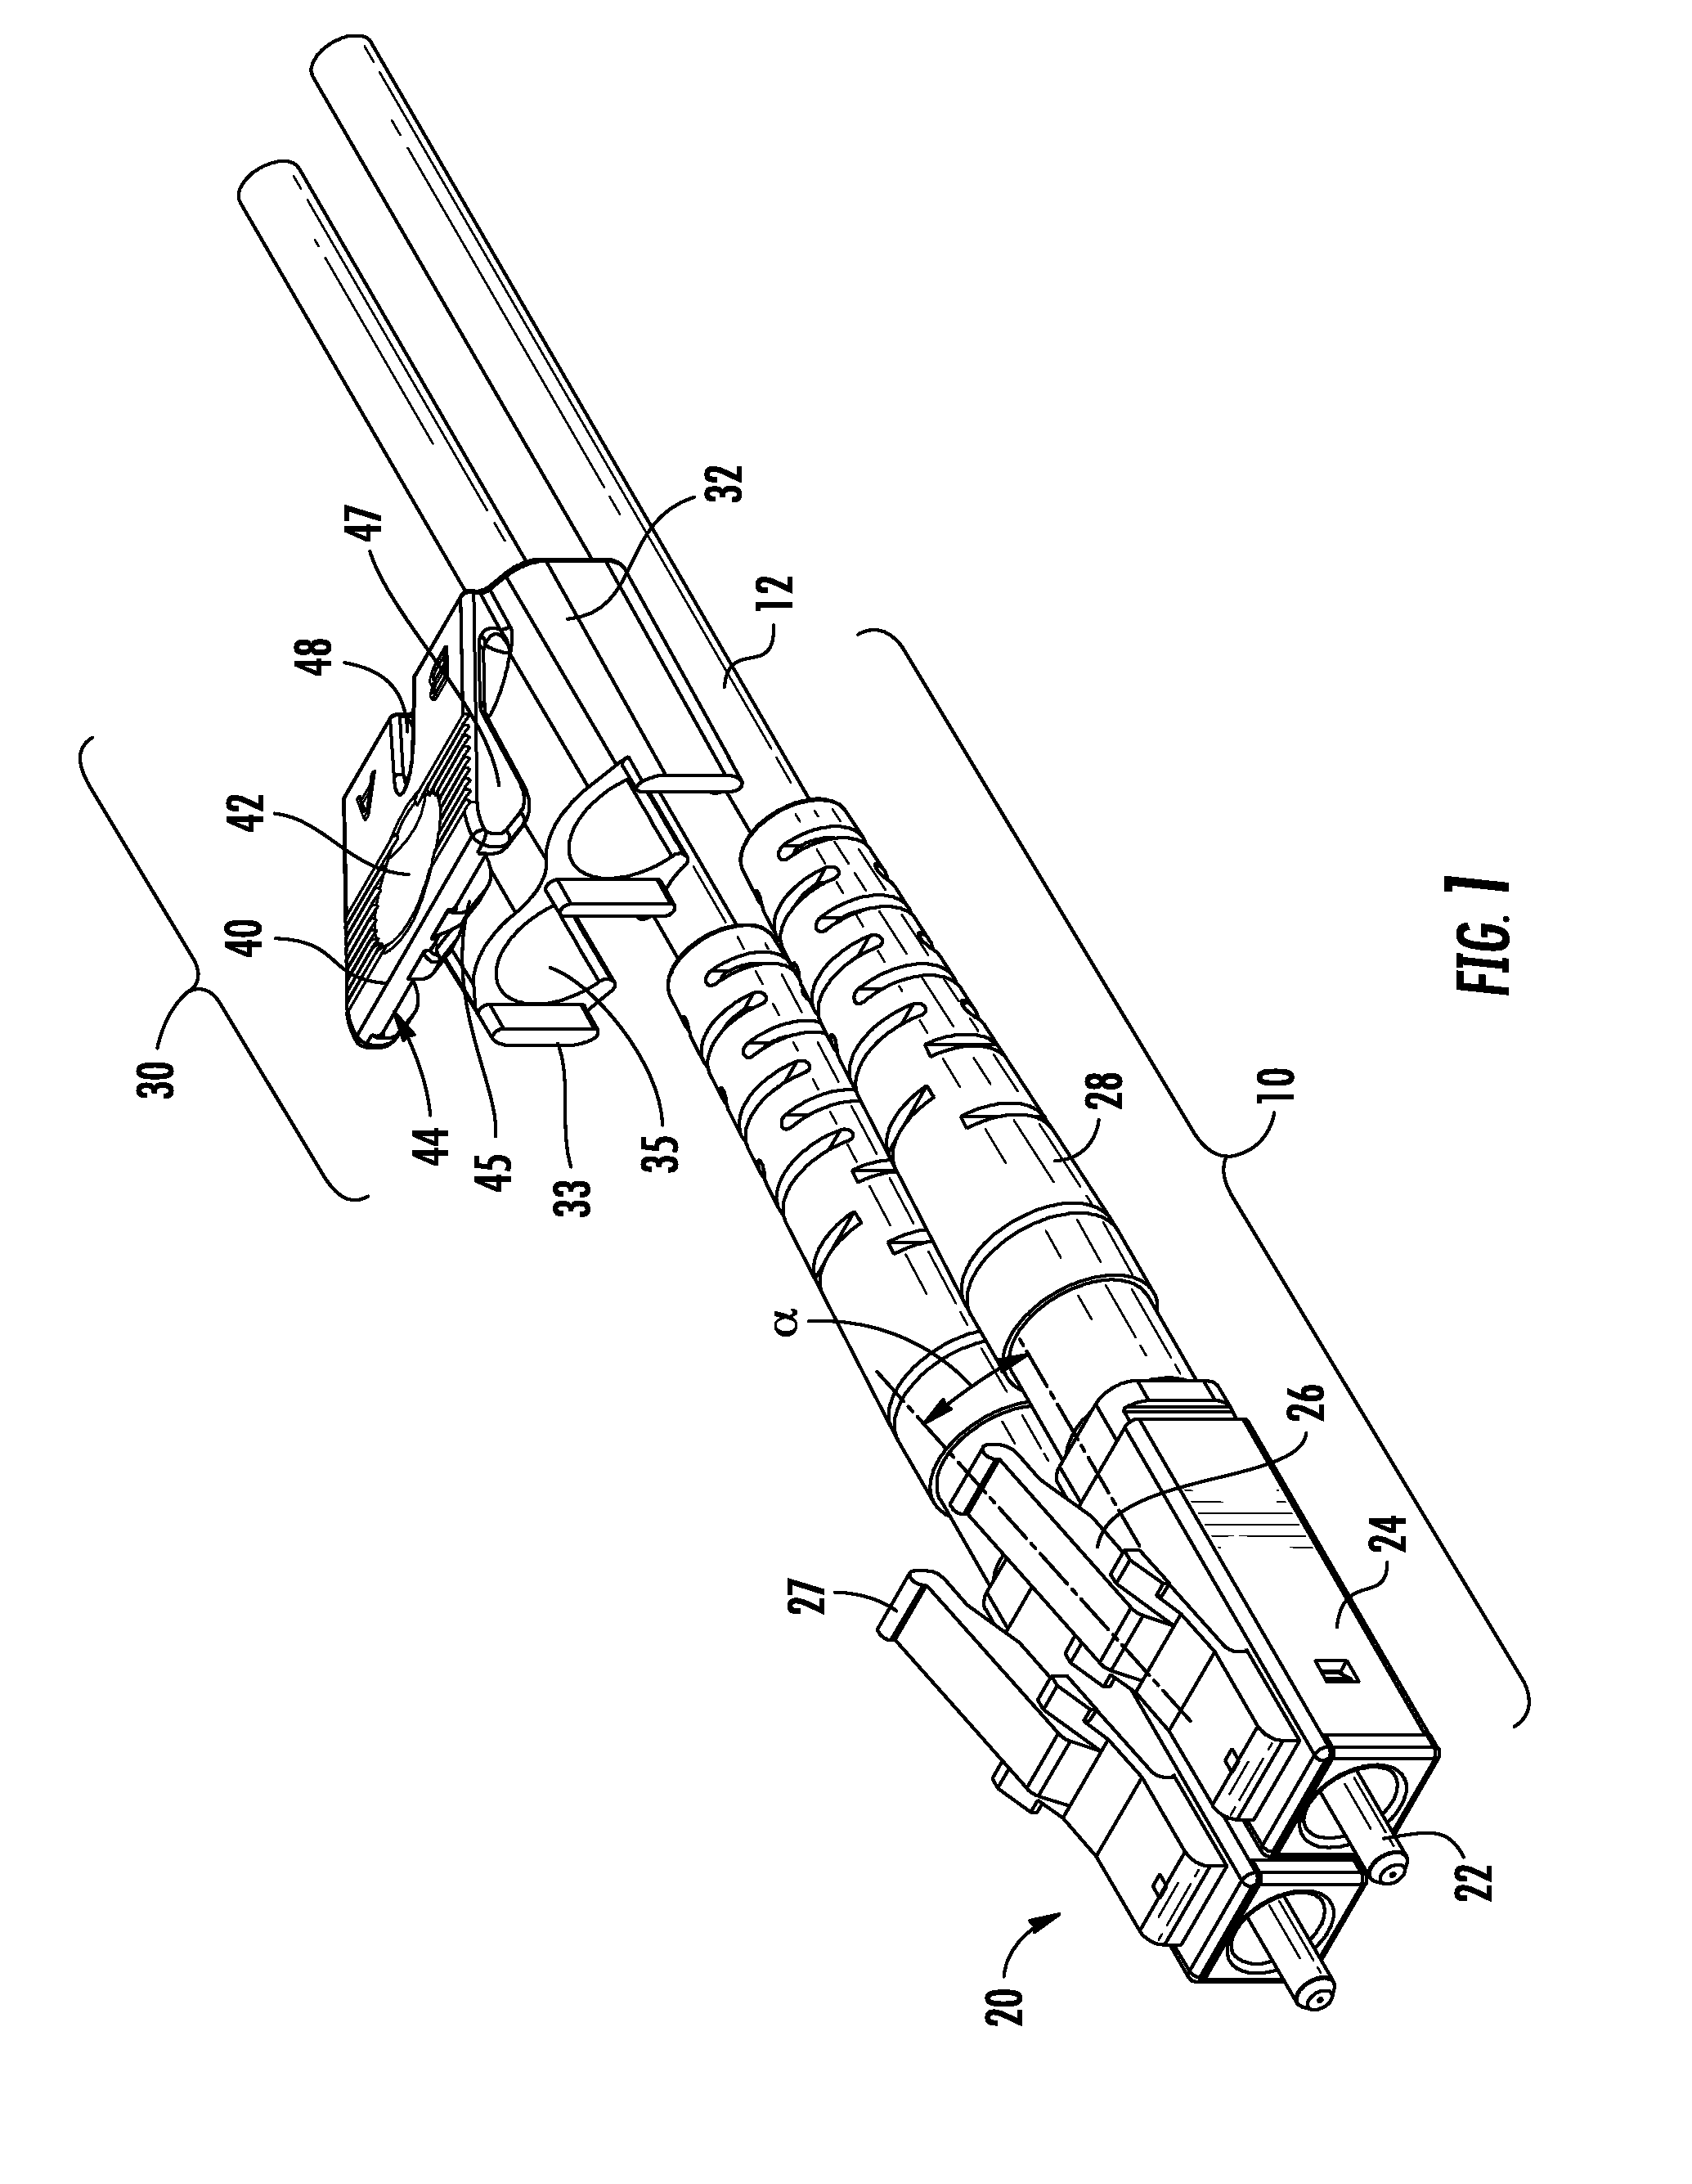 Fiber Optic Connector Assembly and Methods Therefor